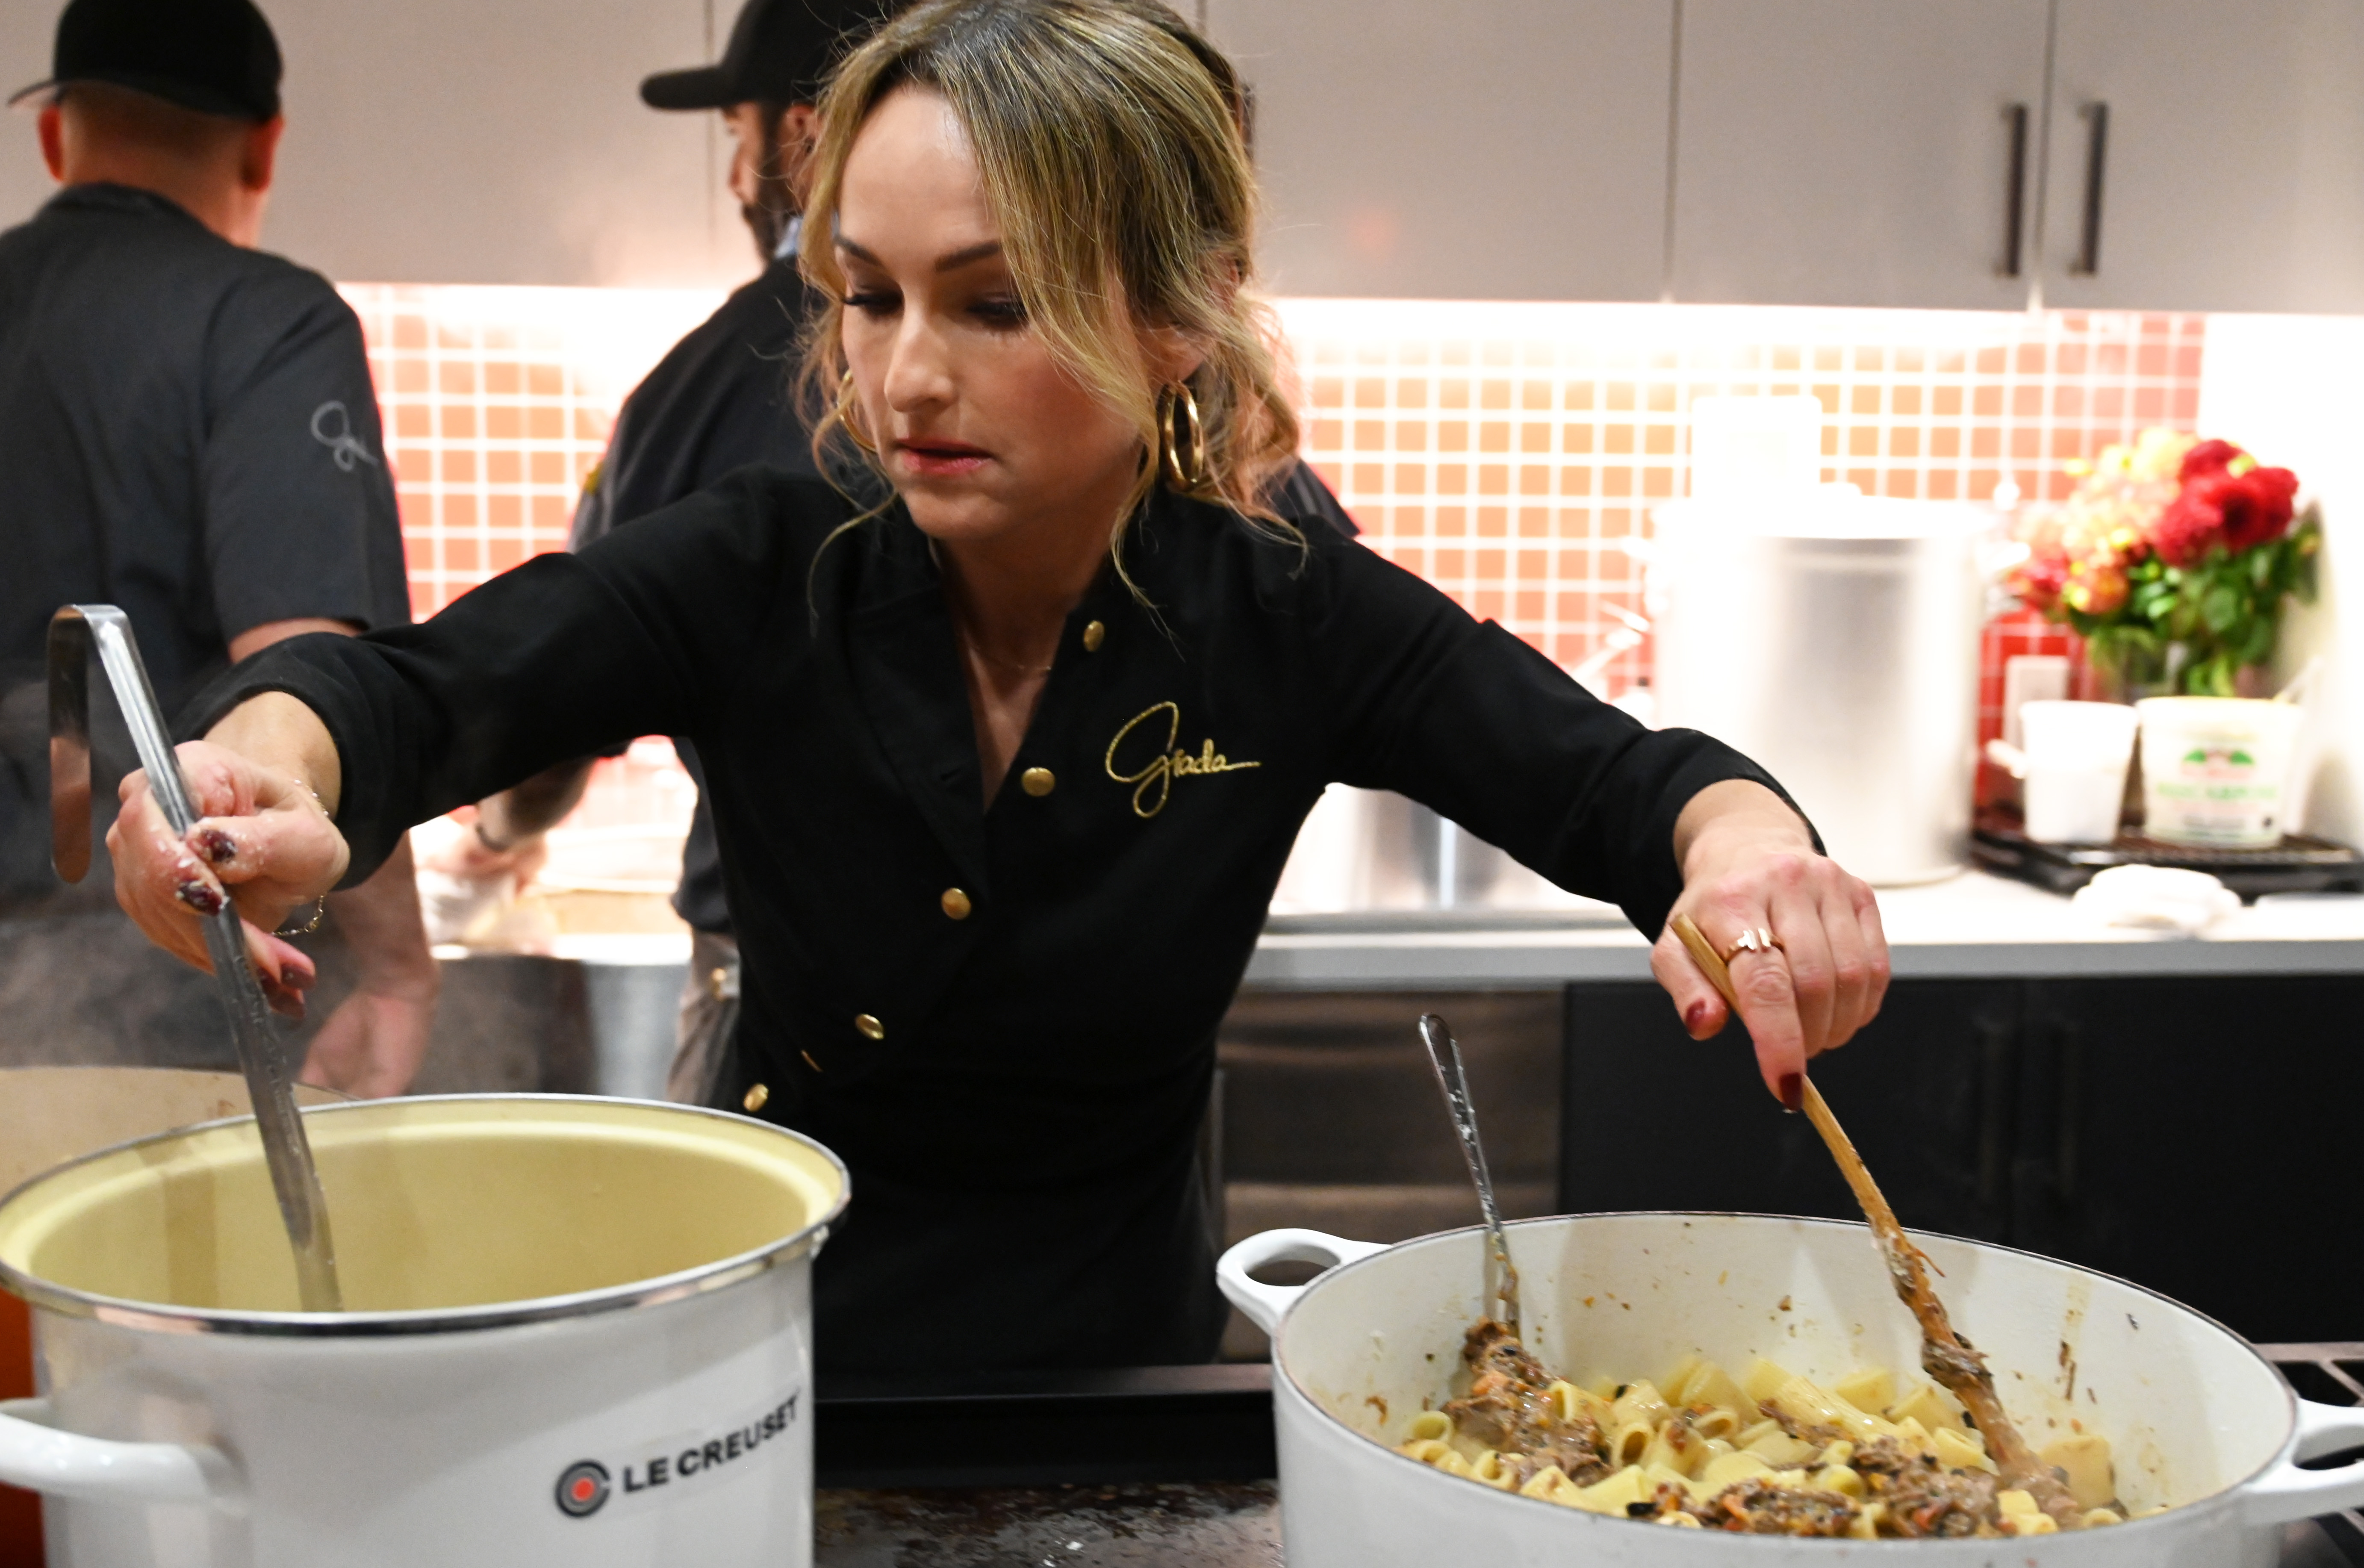 Food Network star Giada De Laurentiis cooks a meal at a 2021 Food Network/Cooking Channel event.